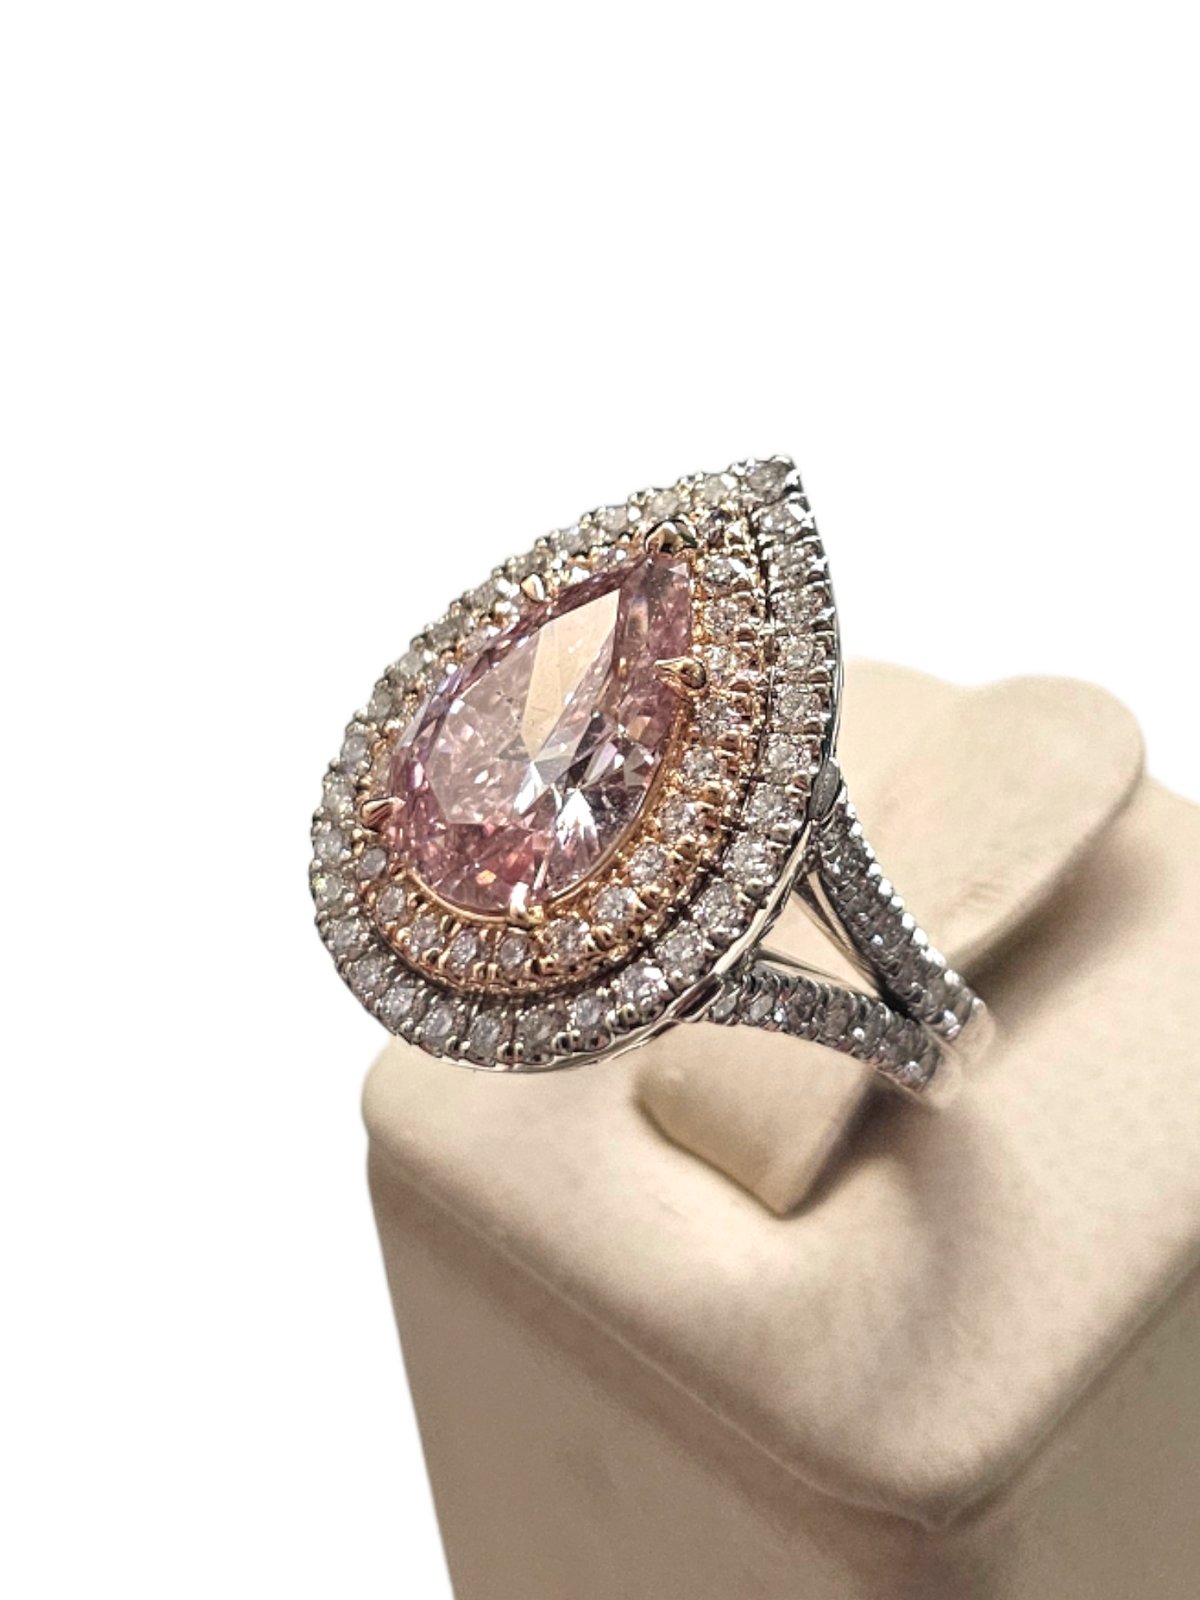 18Kt White and Rose Gold Pink and White Diamond Ring